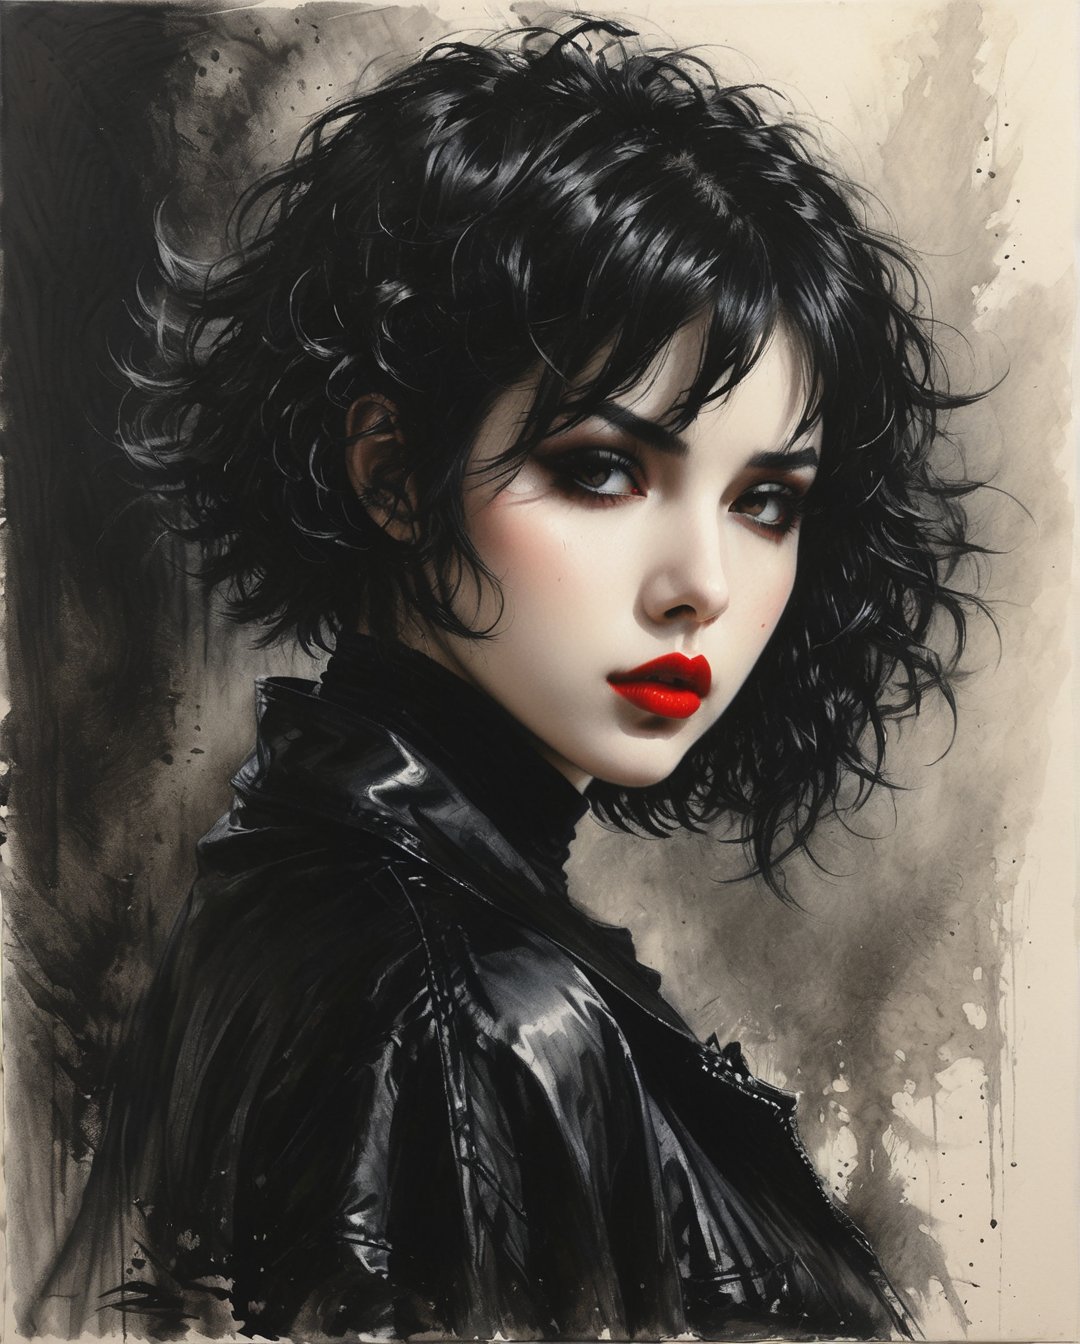 a full-body, high-resolution anime style of a rebellious teenage female goth with short curly black hair, thin face, intense red lips, gothic fashion, inspired by the works of Yoshiaki Kawajiri, vibrant and edgy, with dramatic lighting and dynamic composition, in the style of Bernie Wrightson, Anders Zorn, Alexi Brilo, Luis Royo, extremely detailed, dark, charcoal drawing, black pencil drawing,